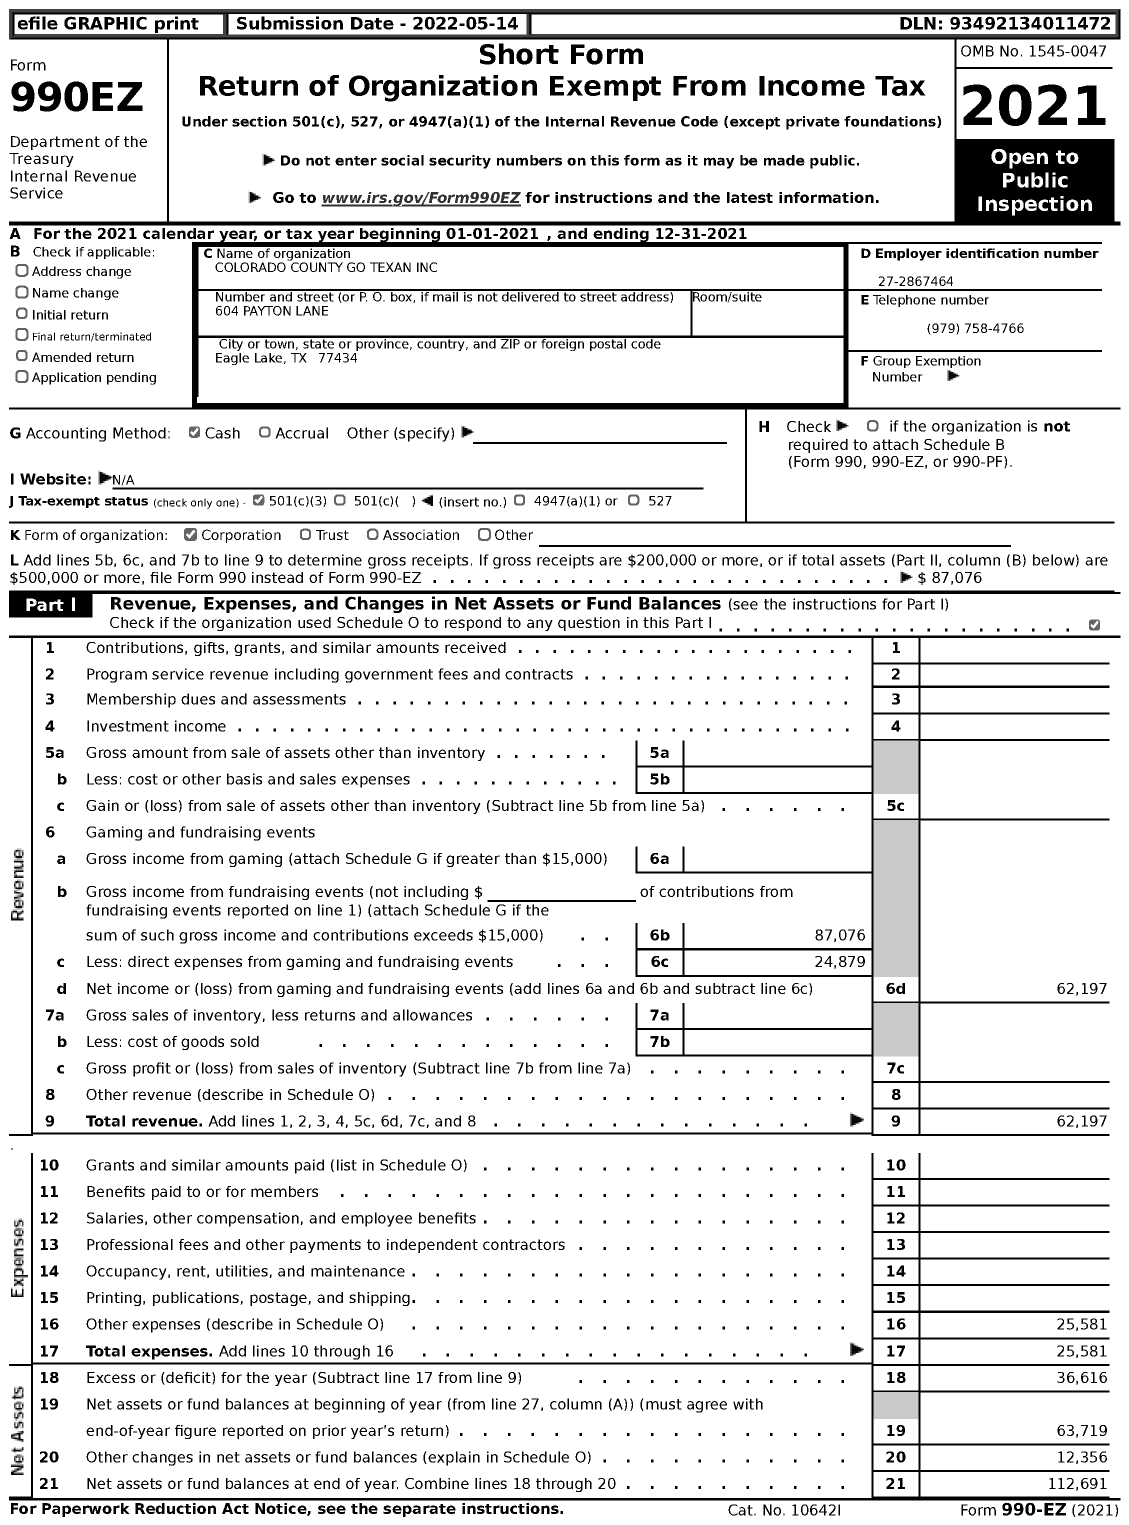 Image of first page of 2021 Form 990EZ for Colorado County Go Texan